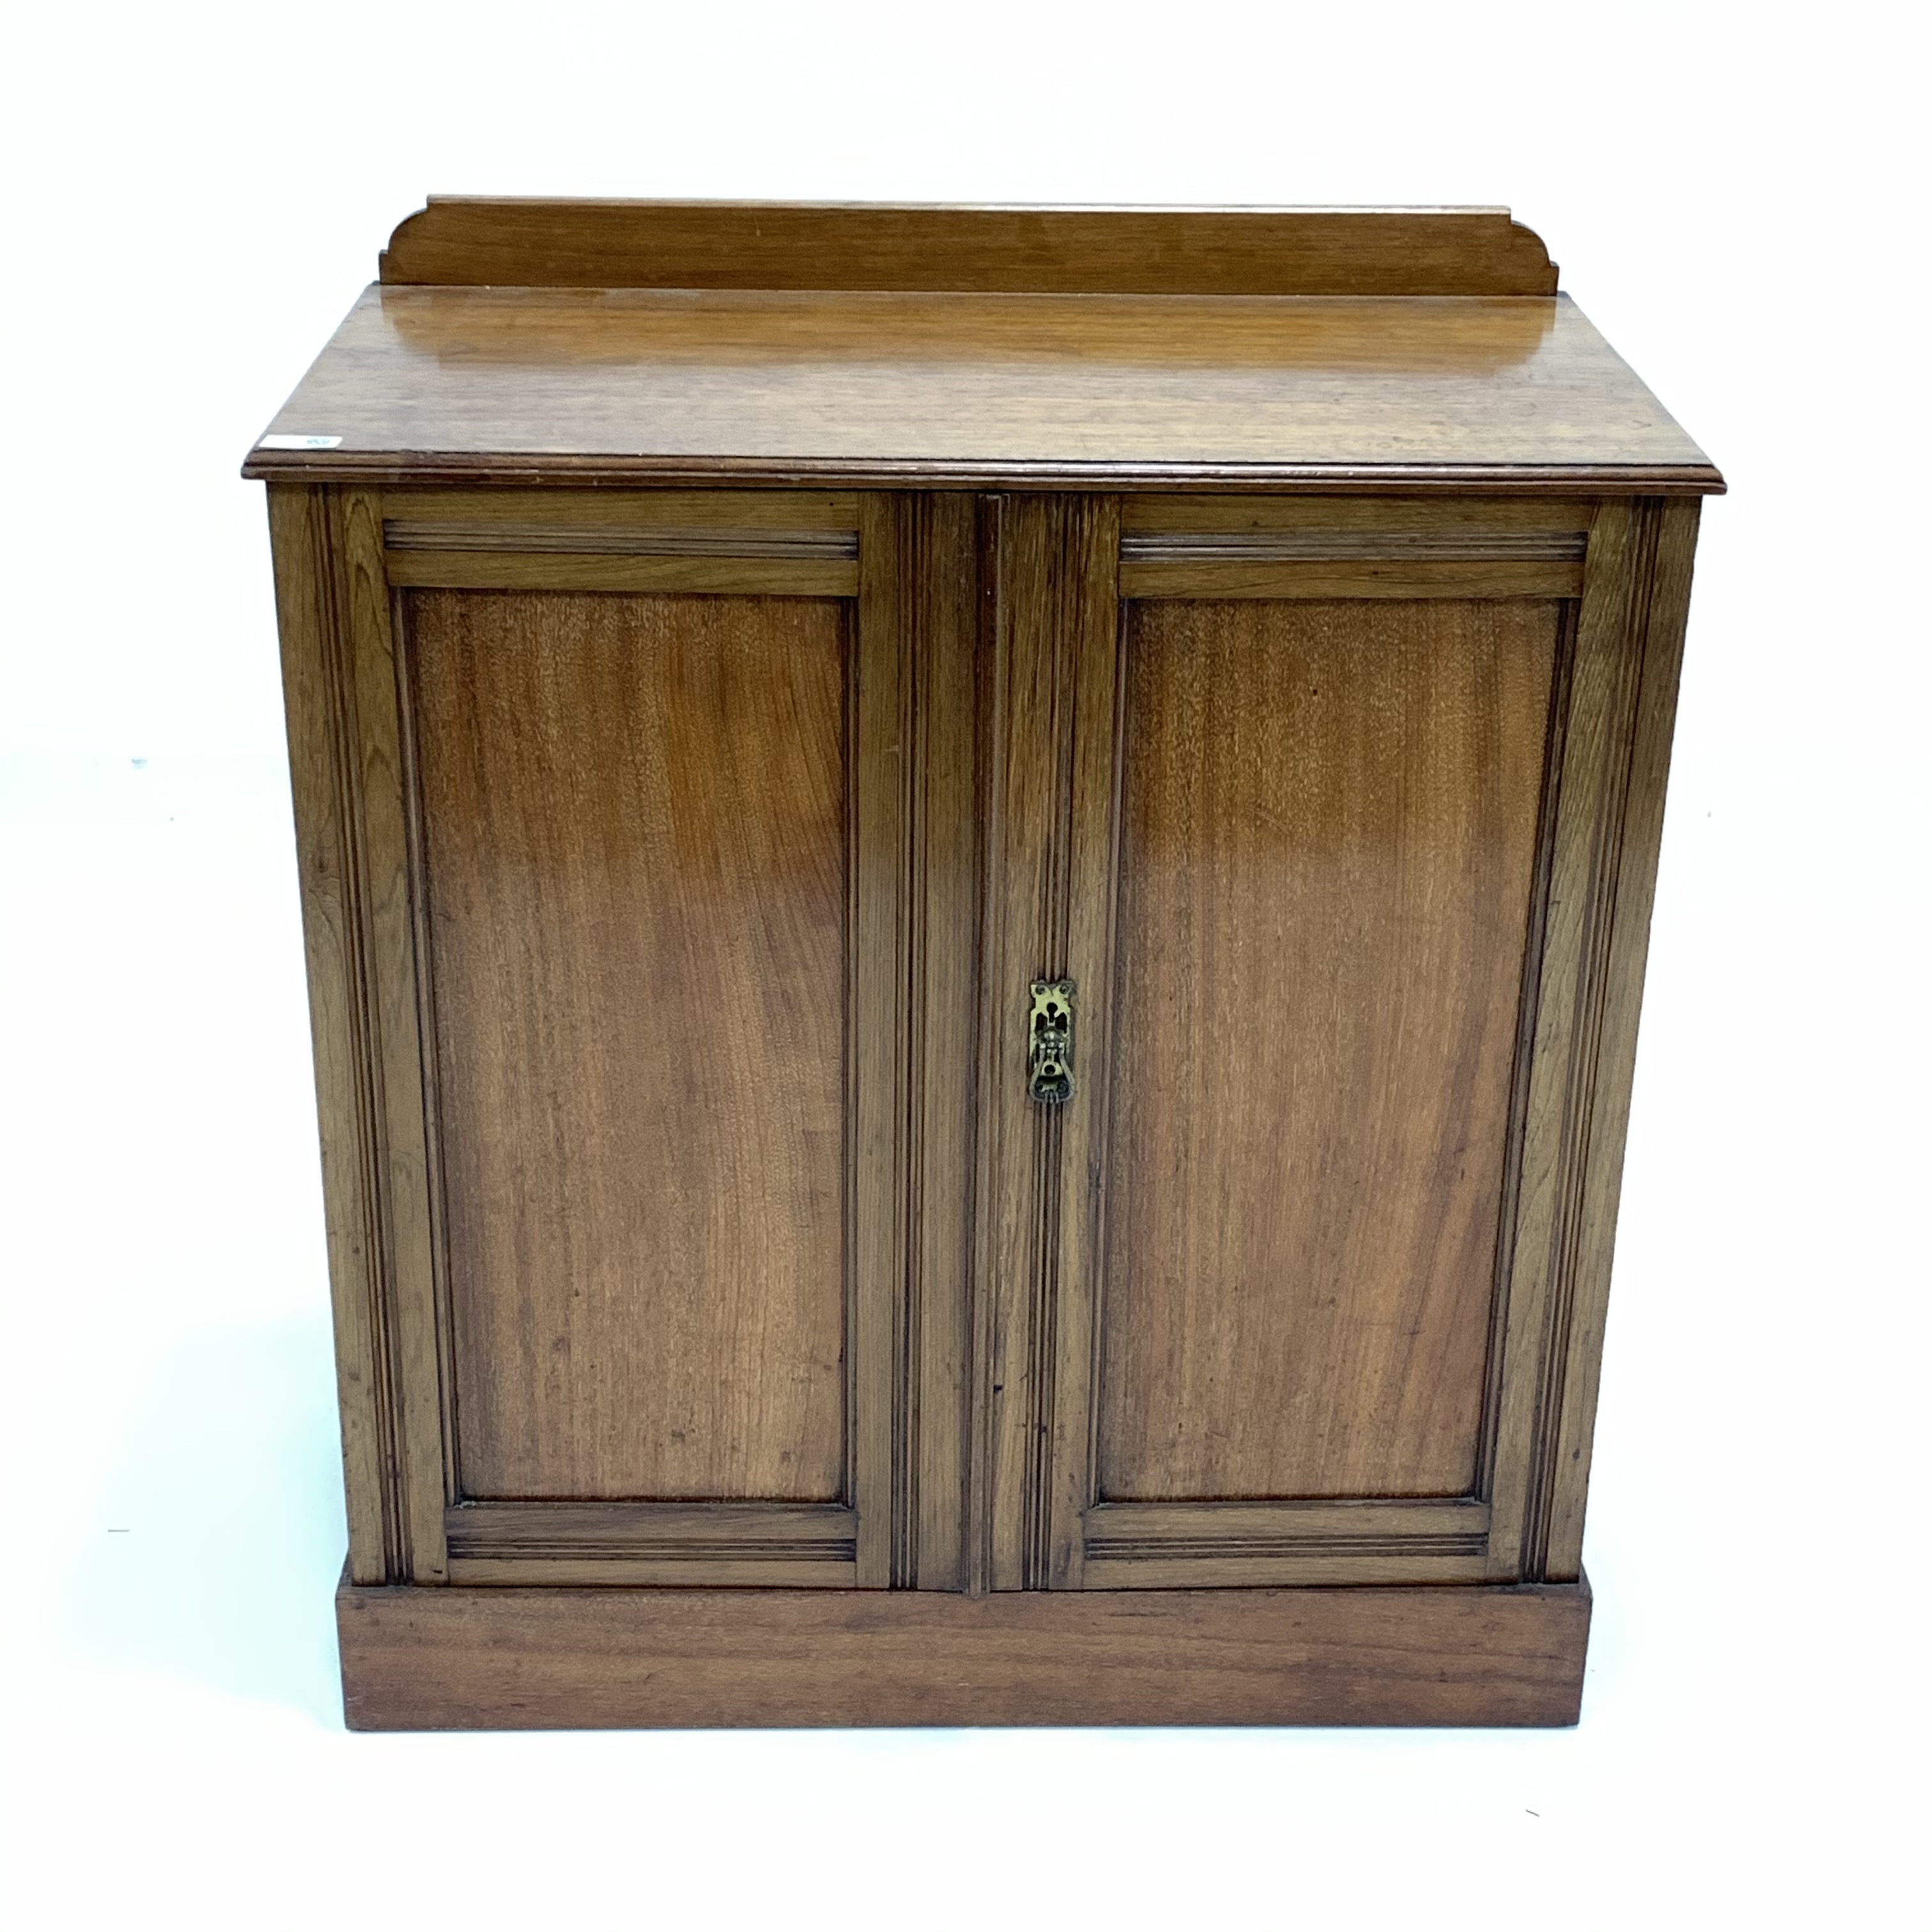 Early 20th century mahogany two door cupboard, with raised back and two fixed shelves, skirted base, - Image 2 of 4